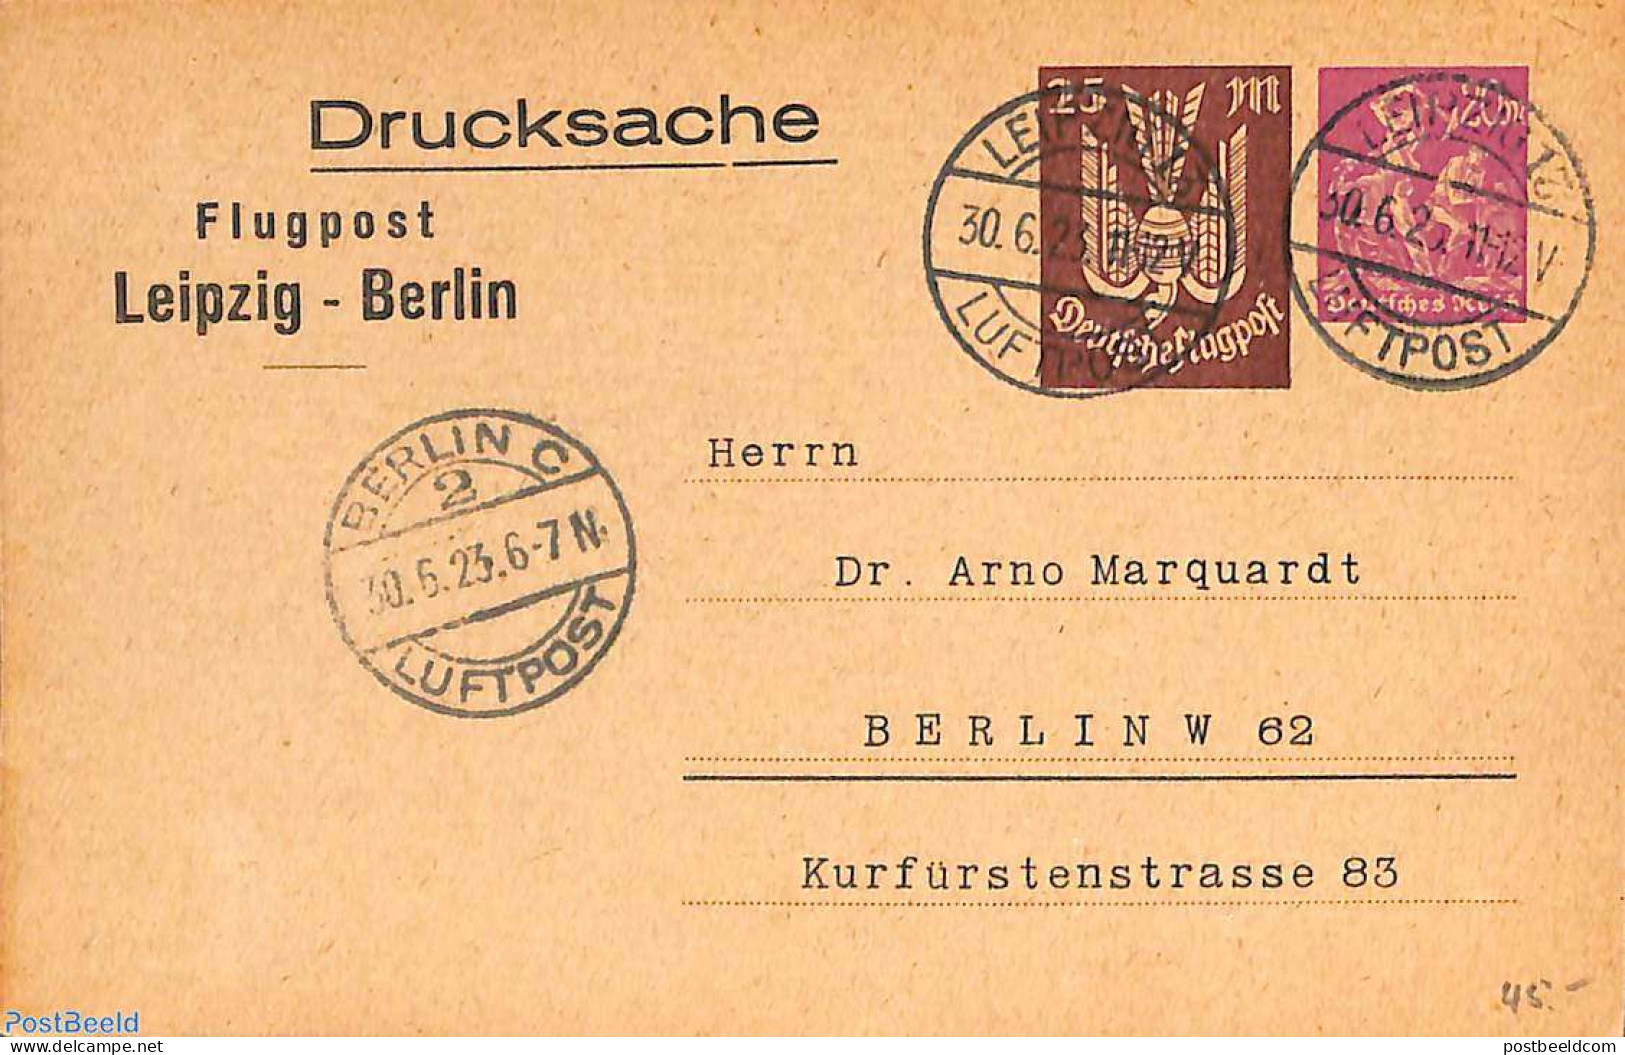 Germany, Empire 1923 Airmail Postcard 20+25m Leipzig-Berlin, Used Postal Stationary - Covers & Documents